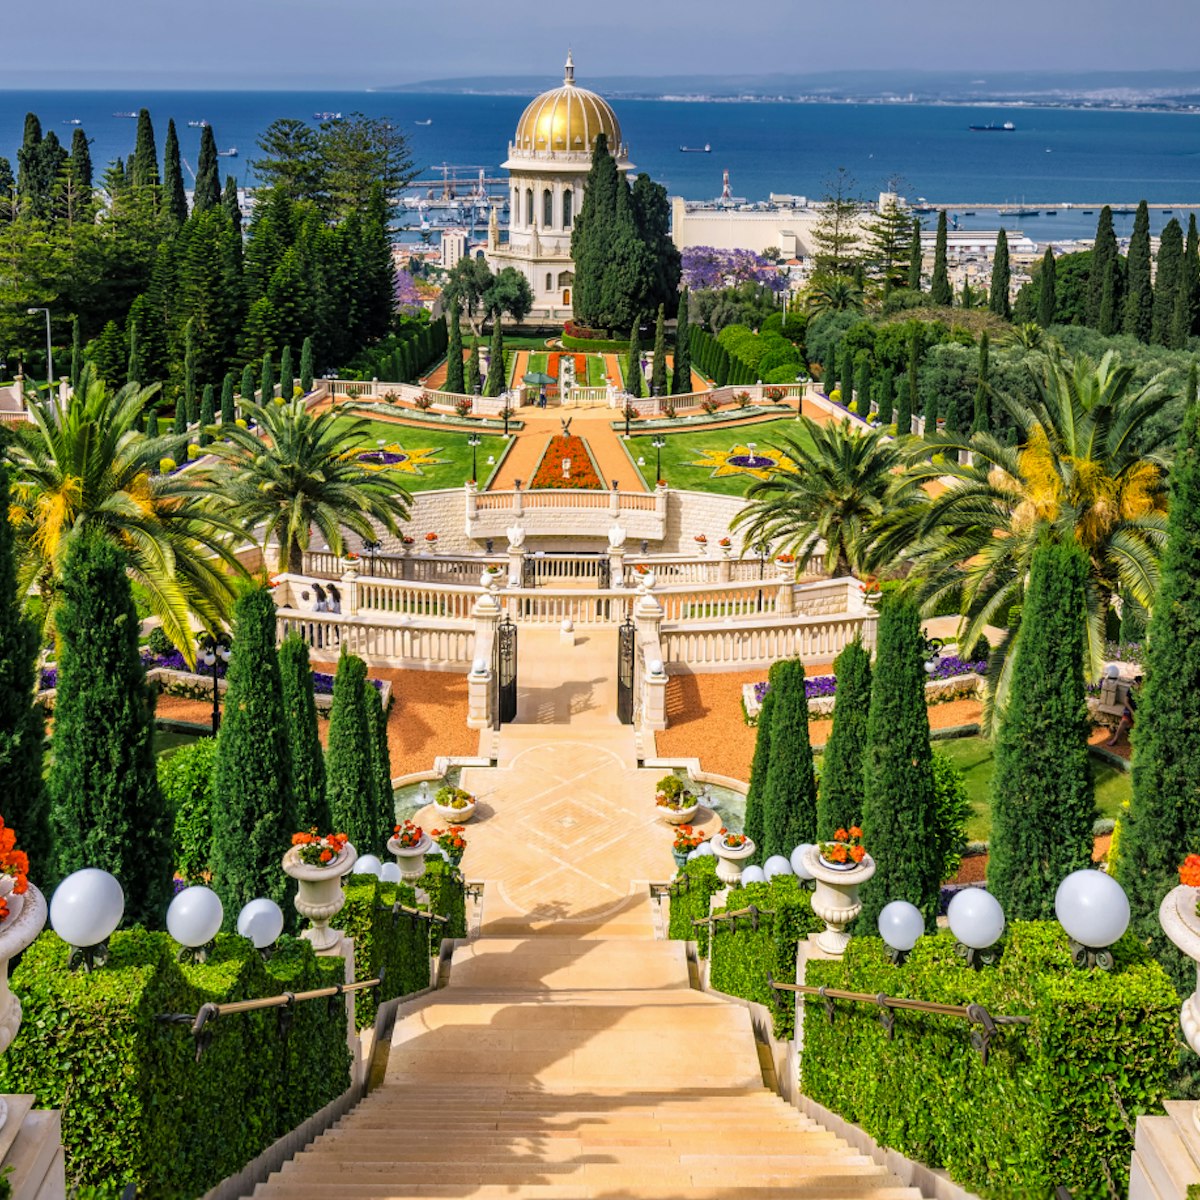 Bahai gardens and temple on the slopes of the Carmel Mountain and view of the Mediterranean Sea and bay of Haifa city, Israel; Shutterstock ID 488223073; Your name (First / Last): Lauren Keith; GL account no.: 65050; Netsuite department name: Online Editorial; Full Product or Project name including edition: Israel Update 2017